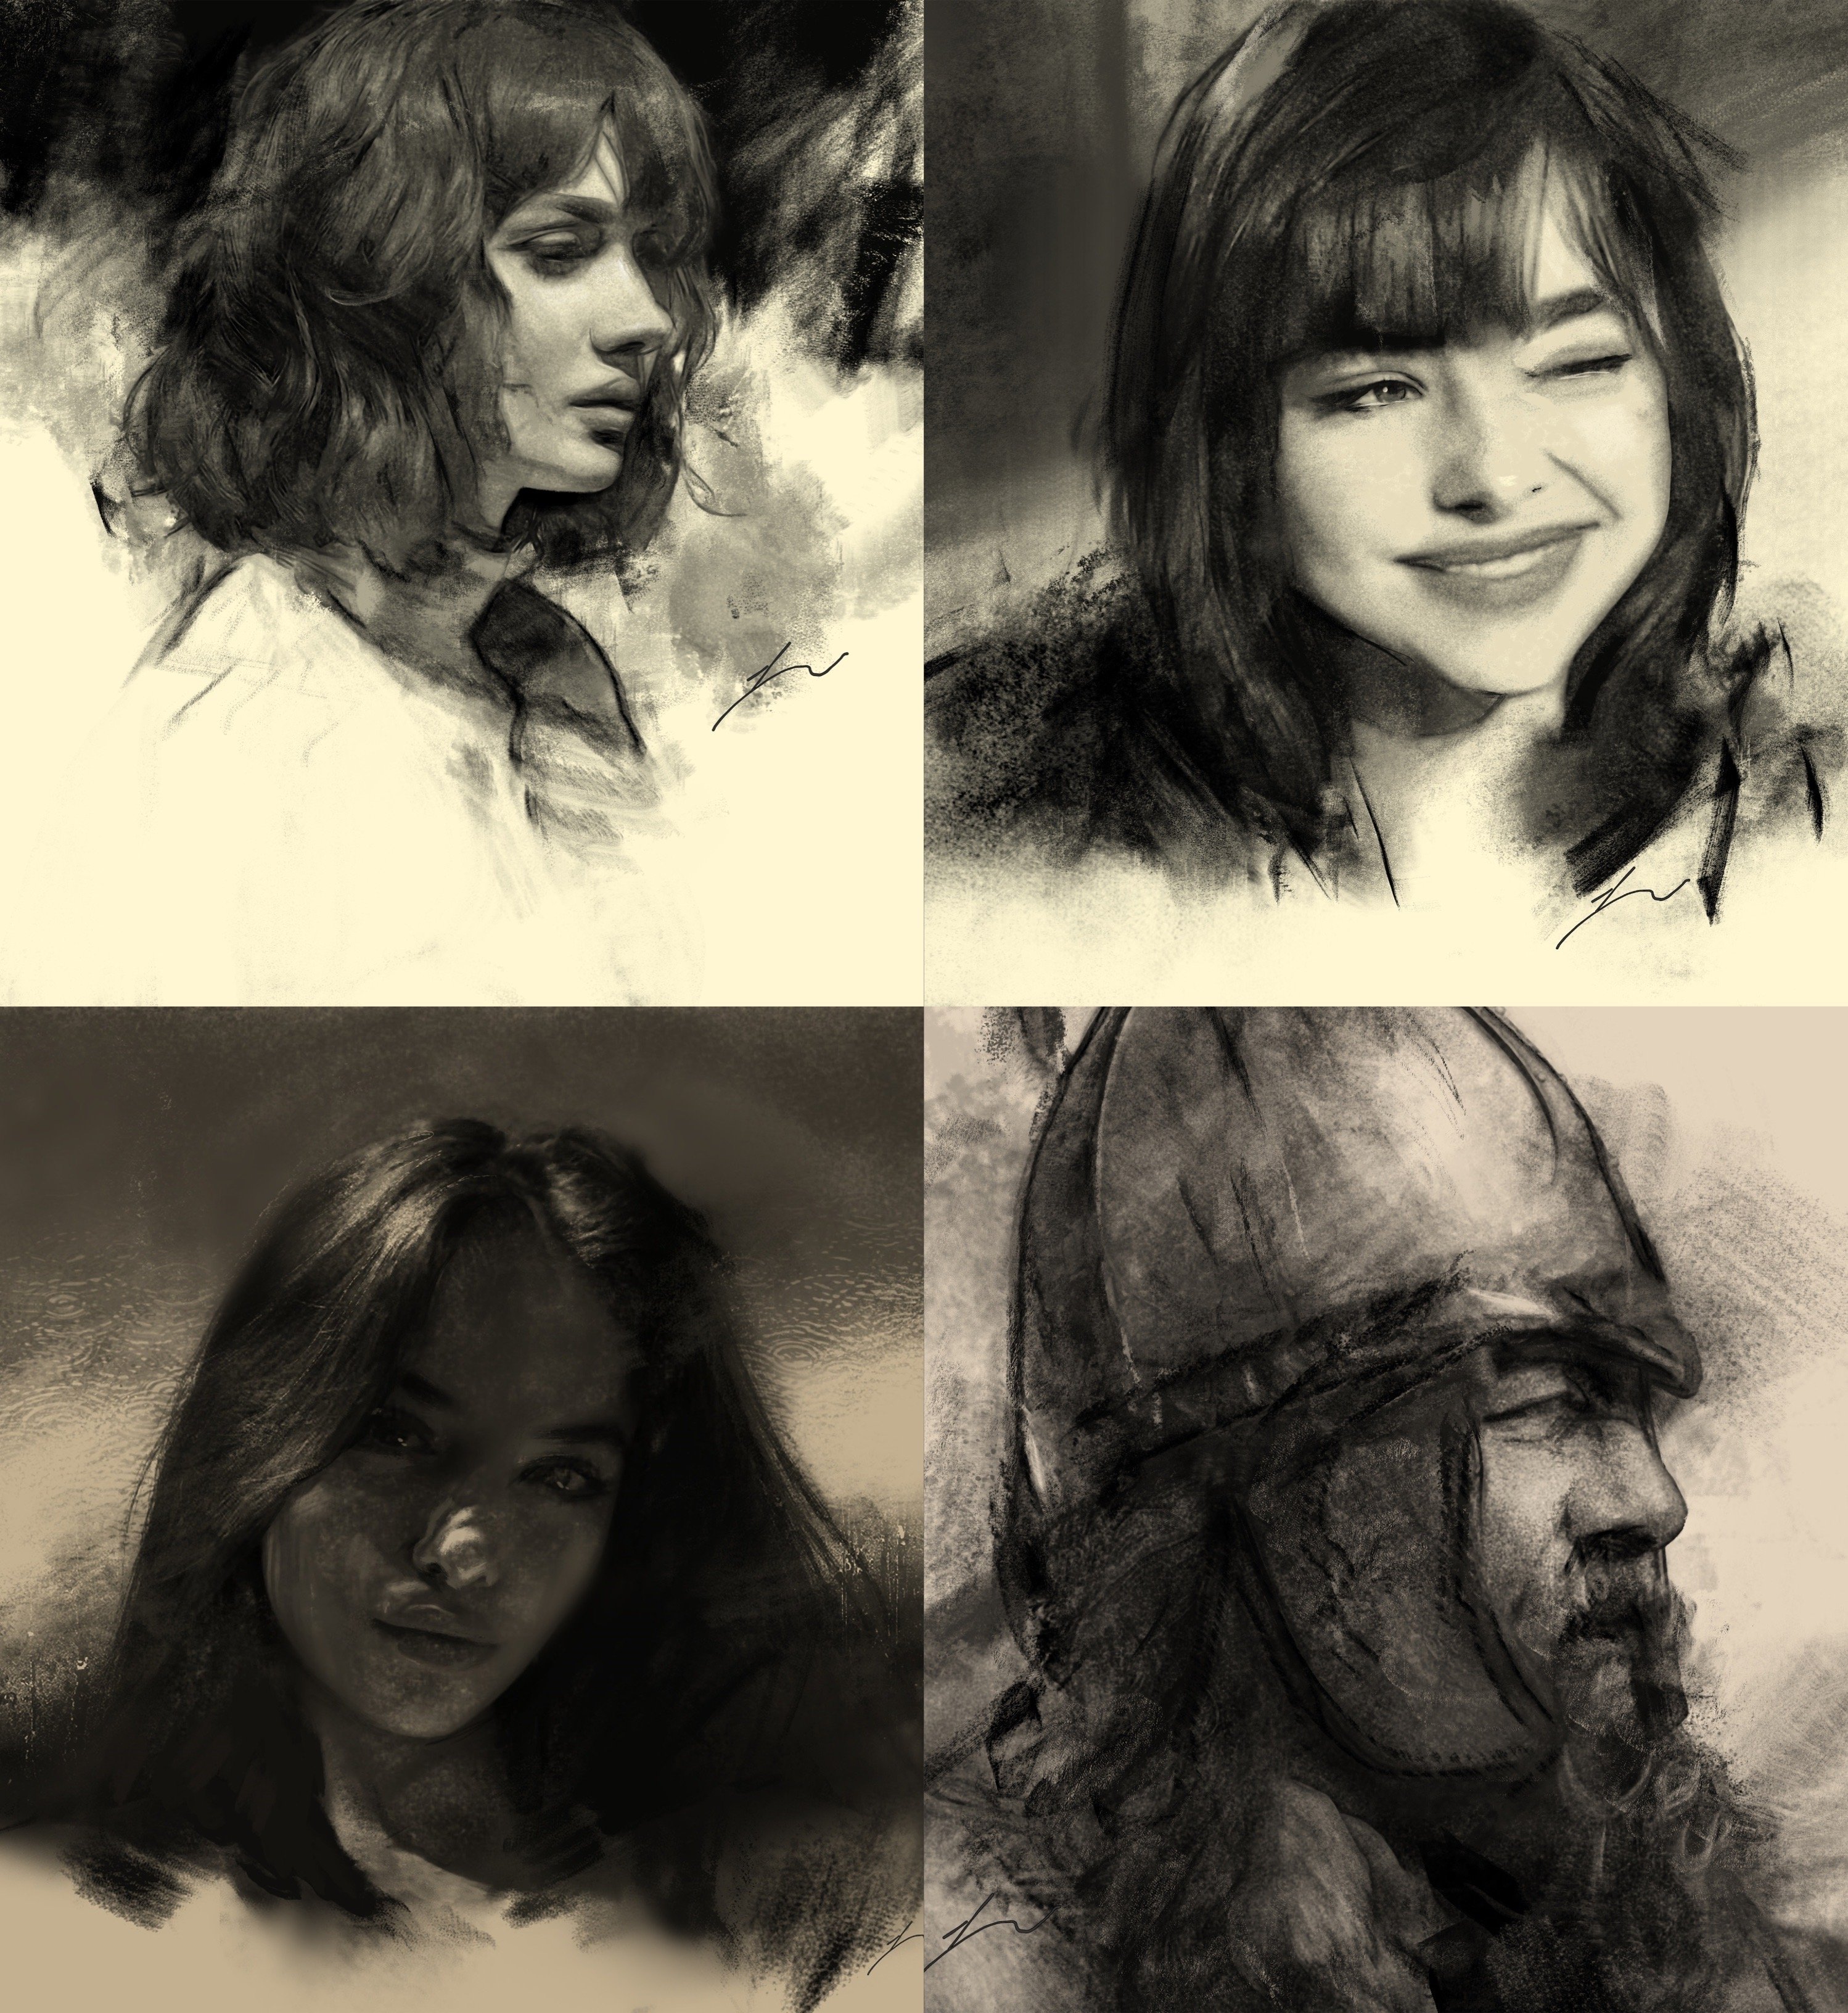 Fenerov Charcoal Brushes For Procreate